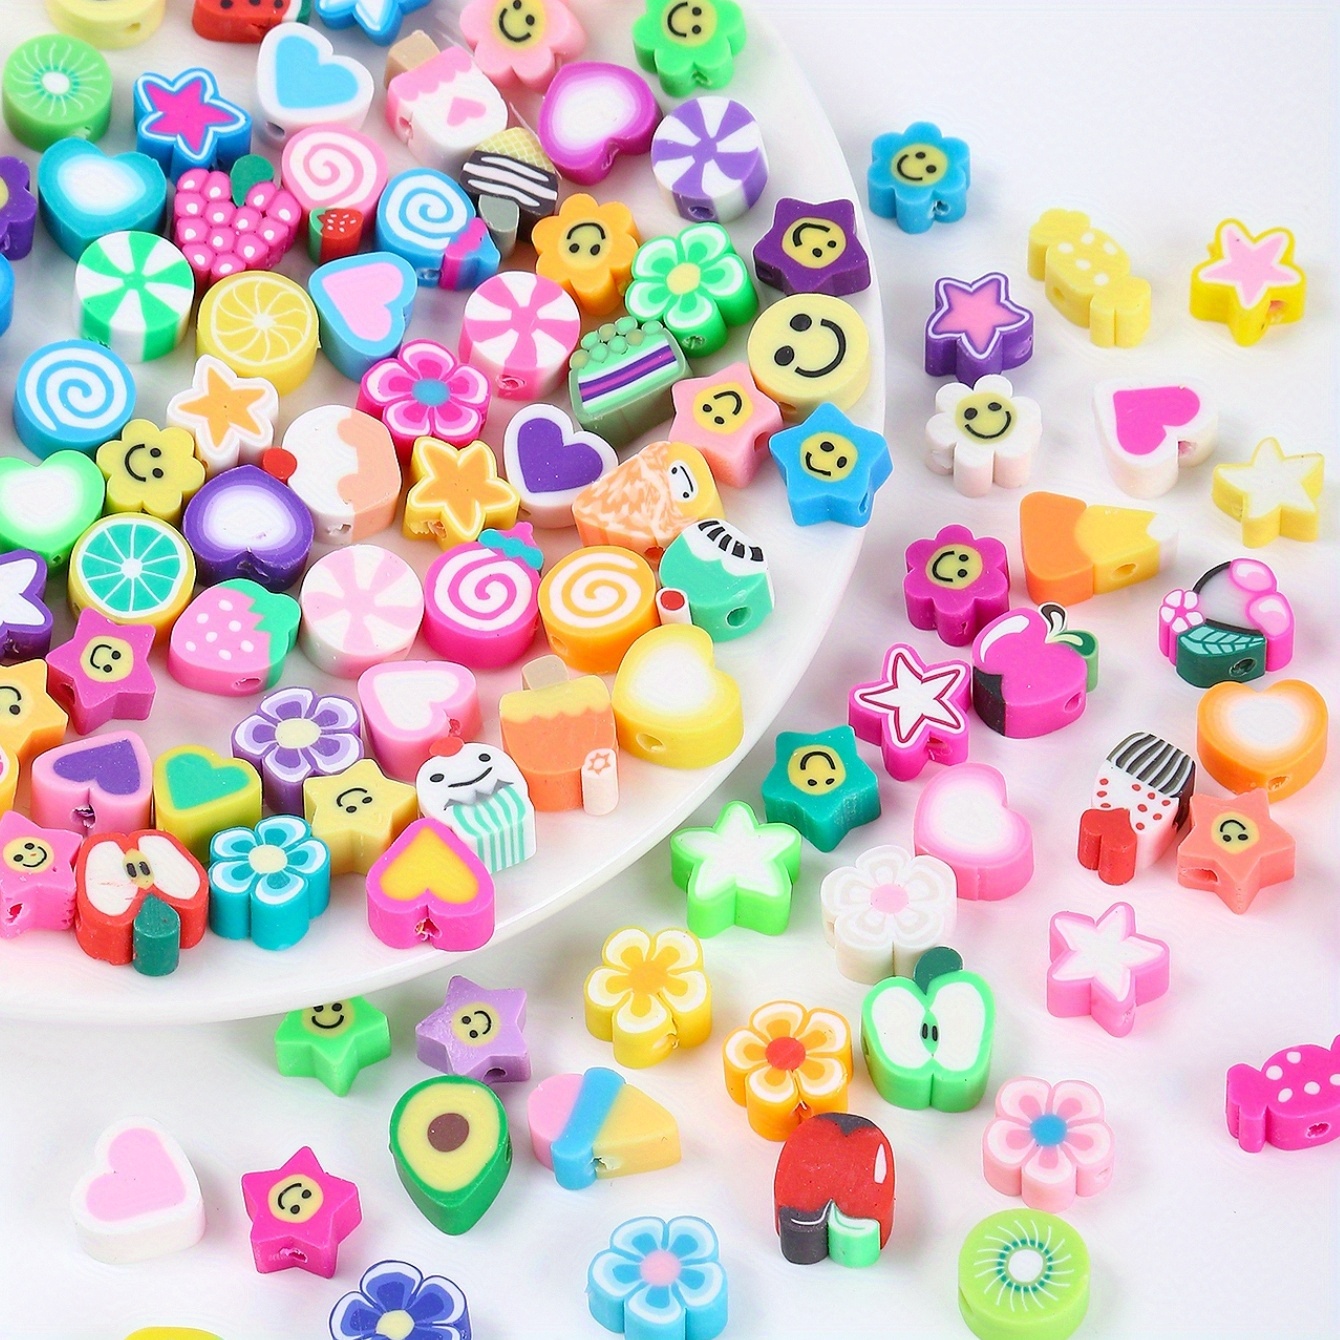 360PCS Fruit Flower Polymer Clay Beads, Cute Smiling Heart Mushroom Clay  Beads Charms for Jewelry Necklace Earring Making, DIY Bracelet Making Kit